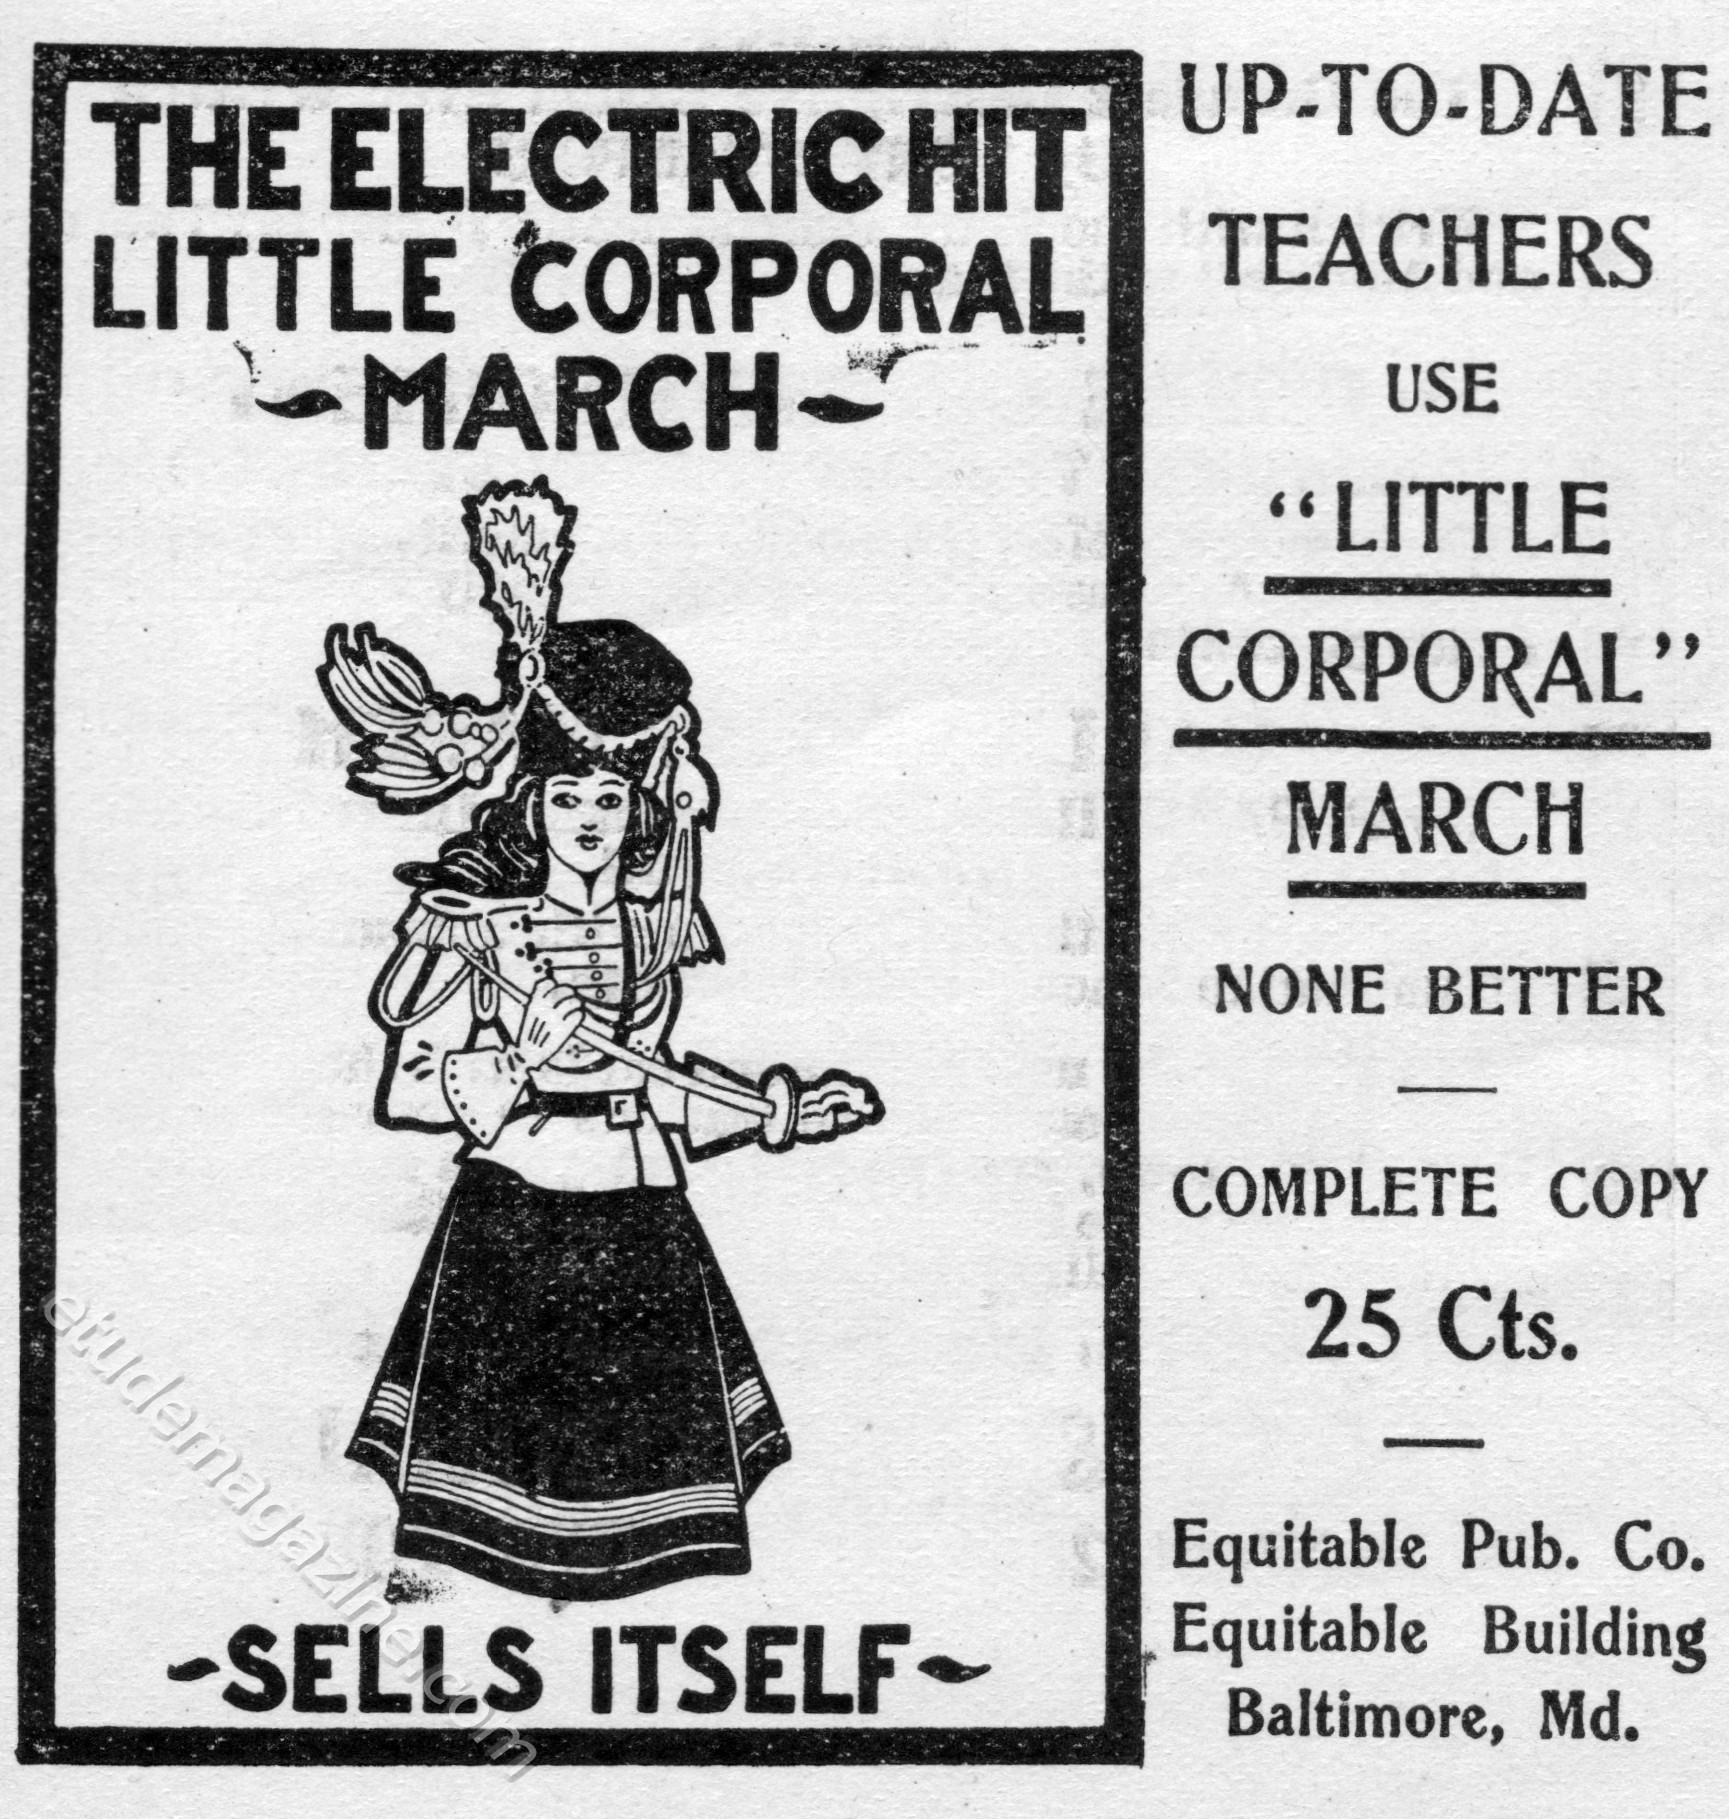 THE ELECTRIC HIT LITTLE CORPORAL MARCH SELLS ITSELF